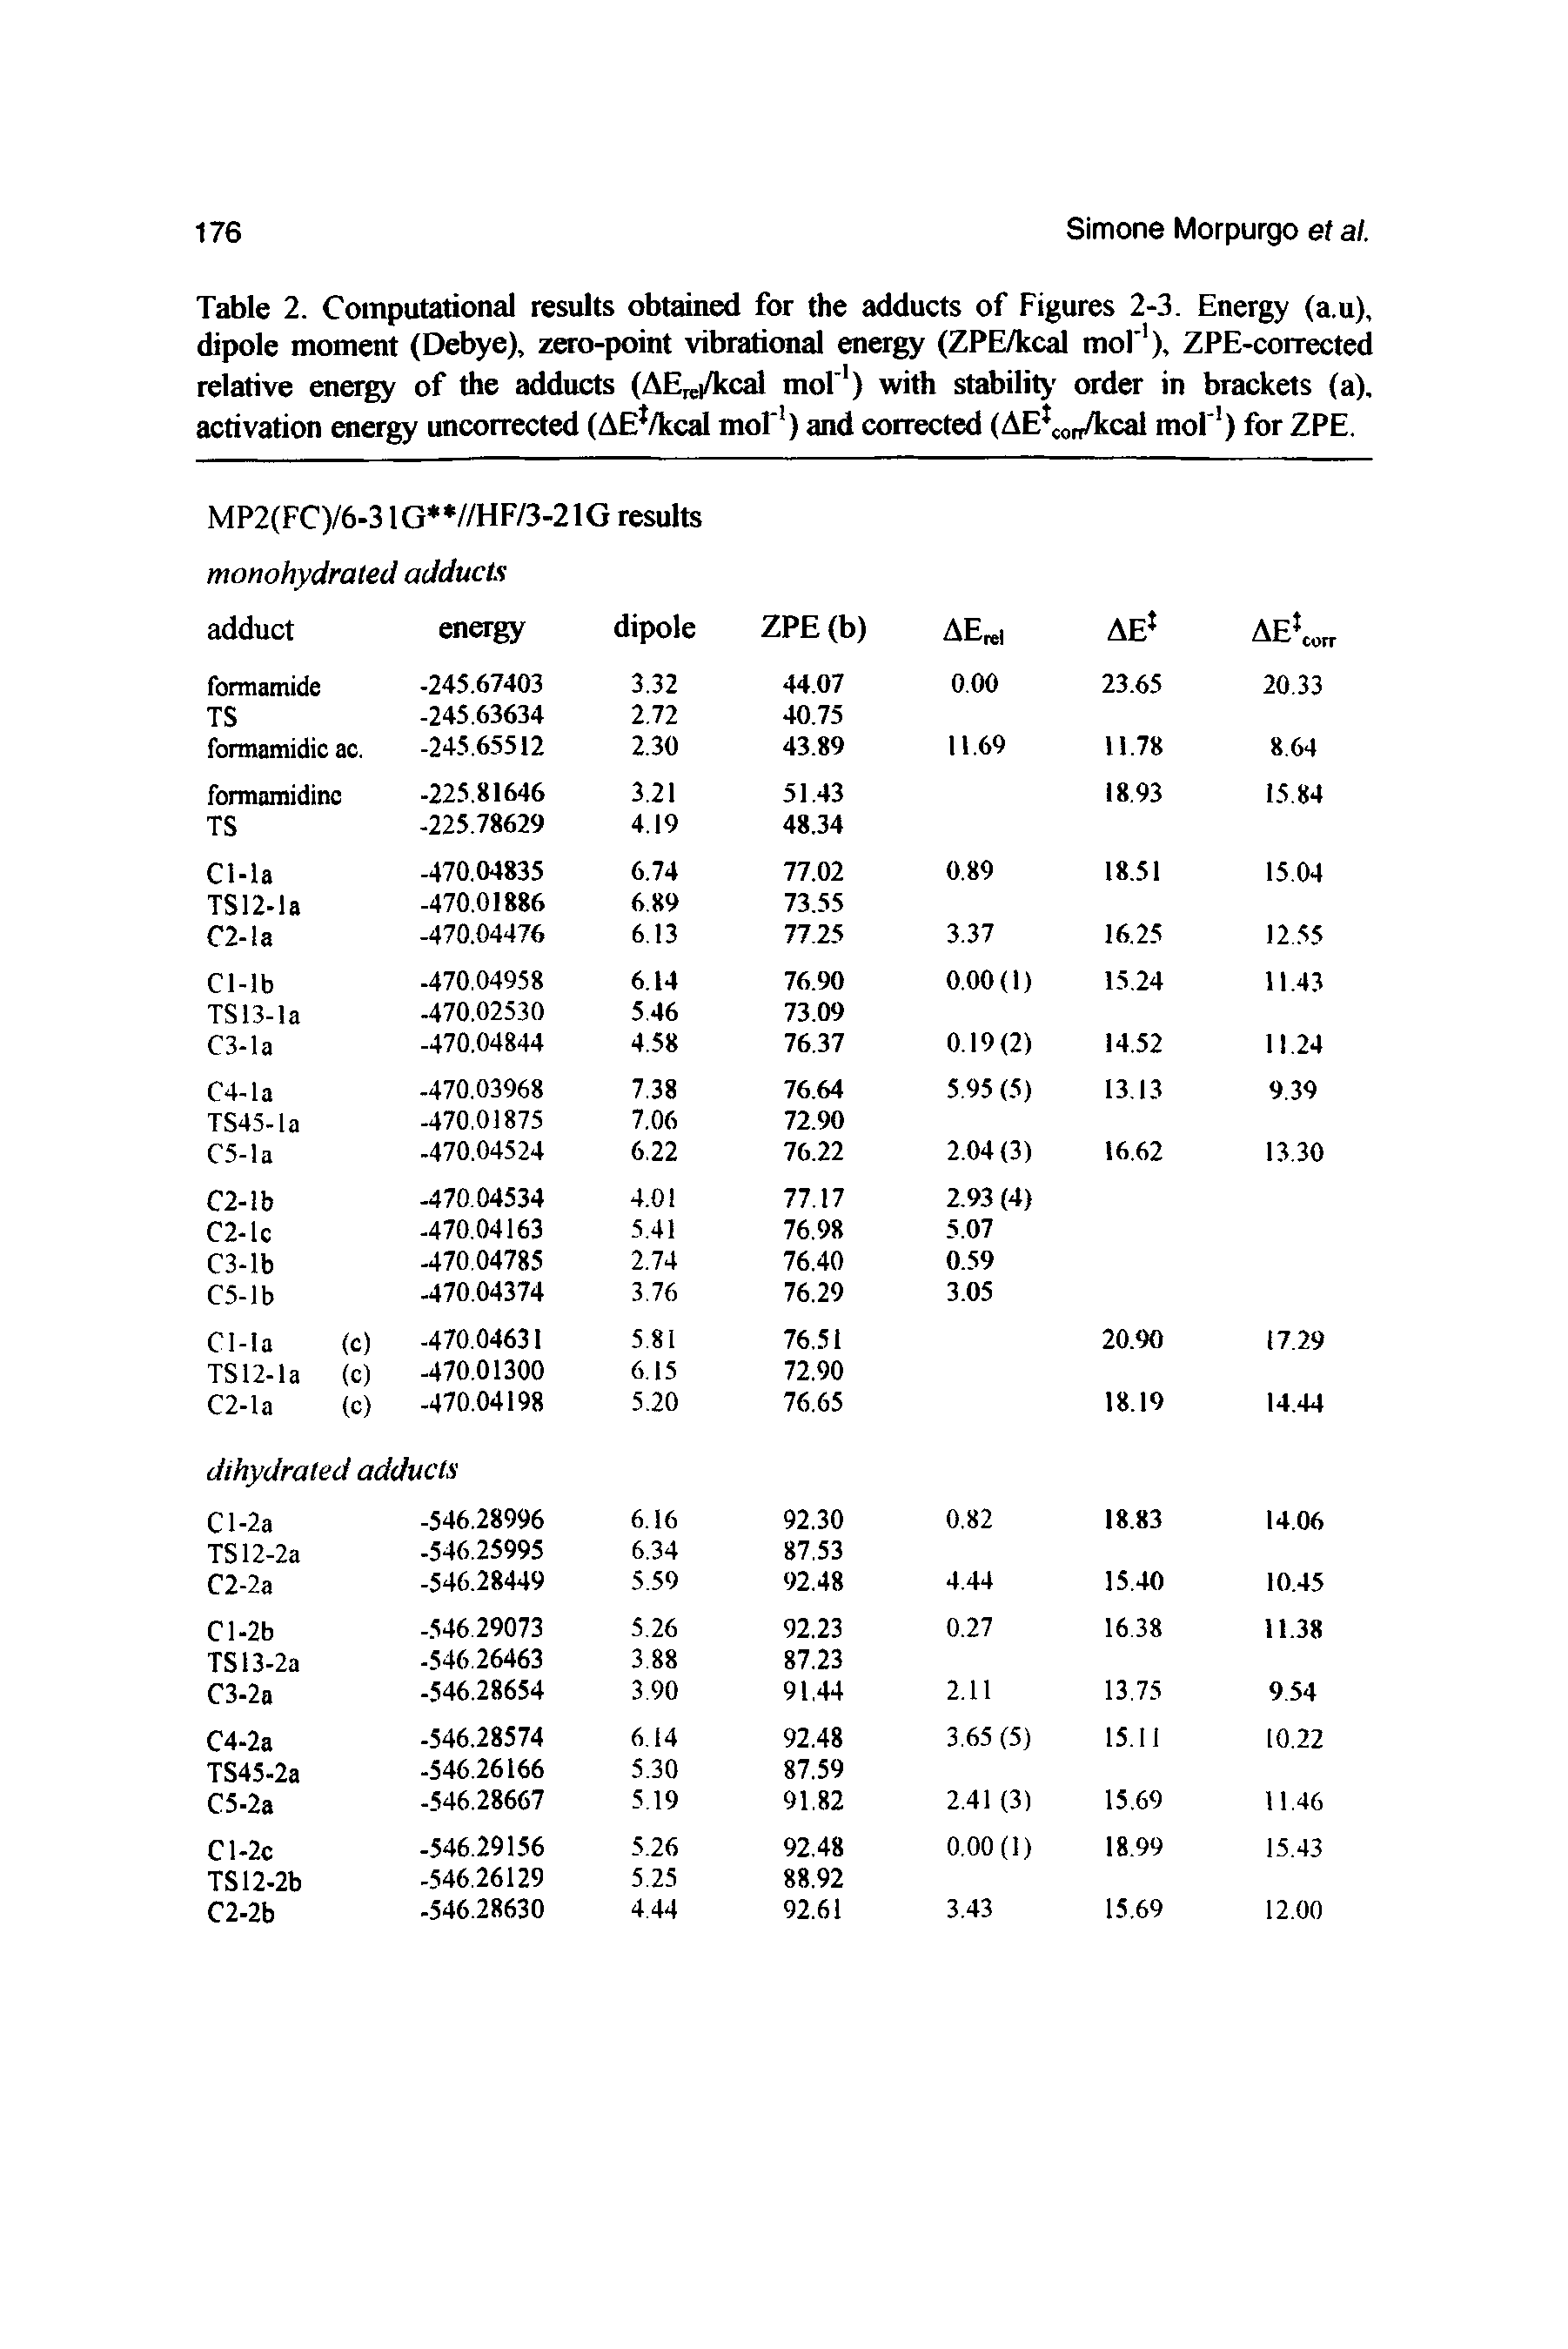 Table 2. Computational results obtained for the adducts of Figures 2-3. Energy (a.u), dipole moment (Debye), zero-point vibrational energy (ZPE/kcd mof ), ZPE-corrected relative energy of the adducts (AE /kcal mof ) with stability order in brackets (a), activation energy uncorrected (AE /kcal mof ) and corrected (AE corr/kcal mof ) for ZPE.